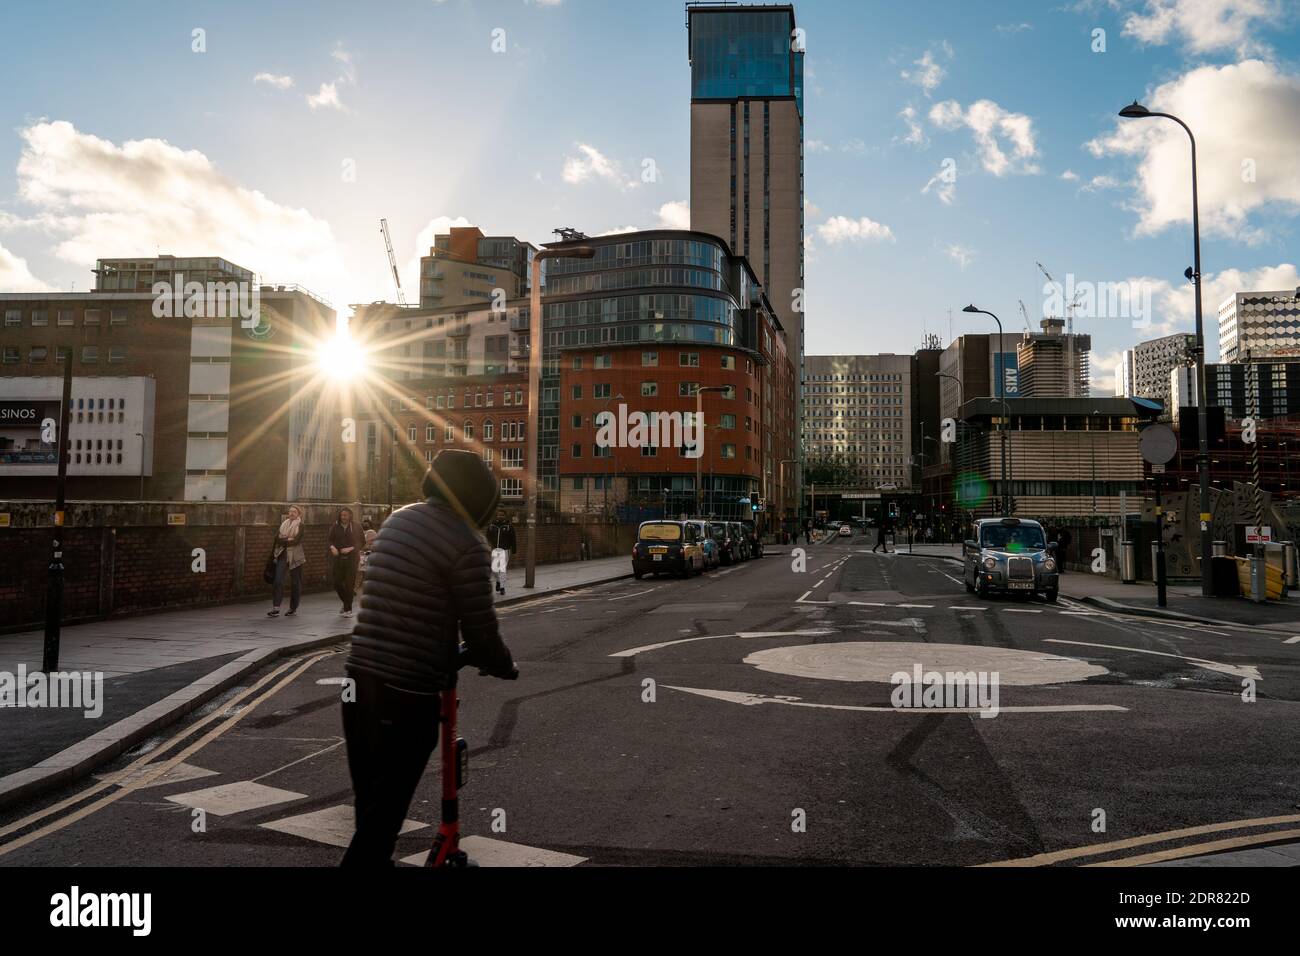 Birmingham cityscape with setting sun over buildings, pedestrians walking and man on electric scooter Stock Photo